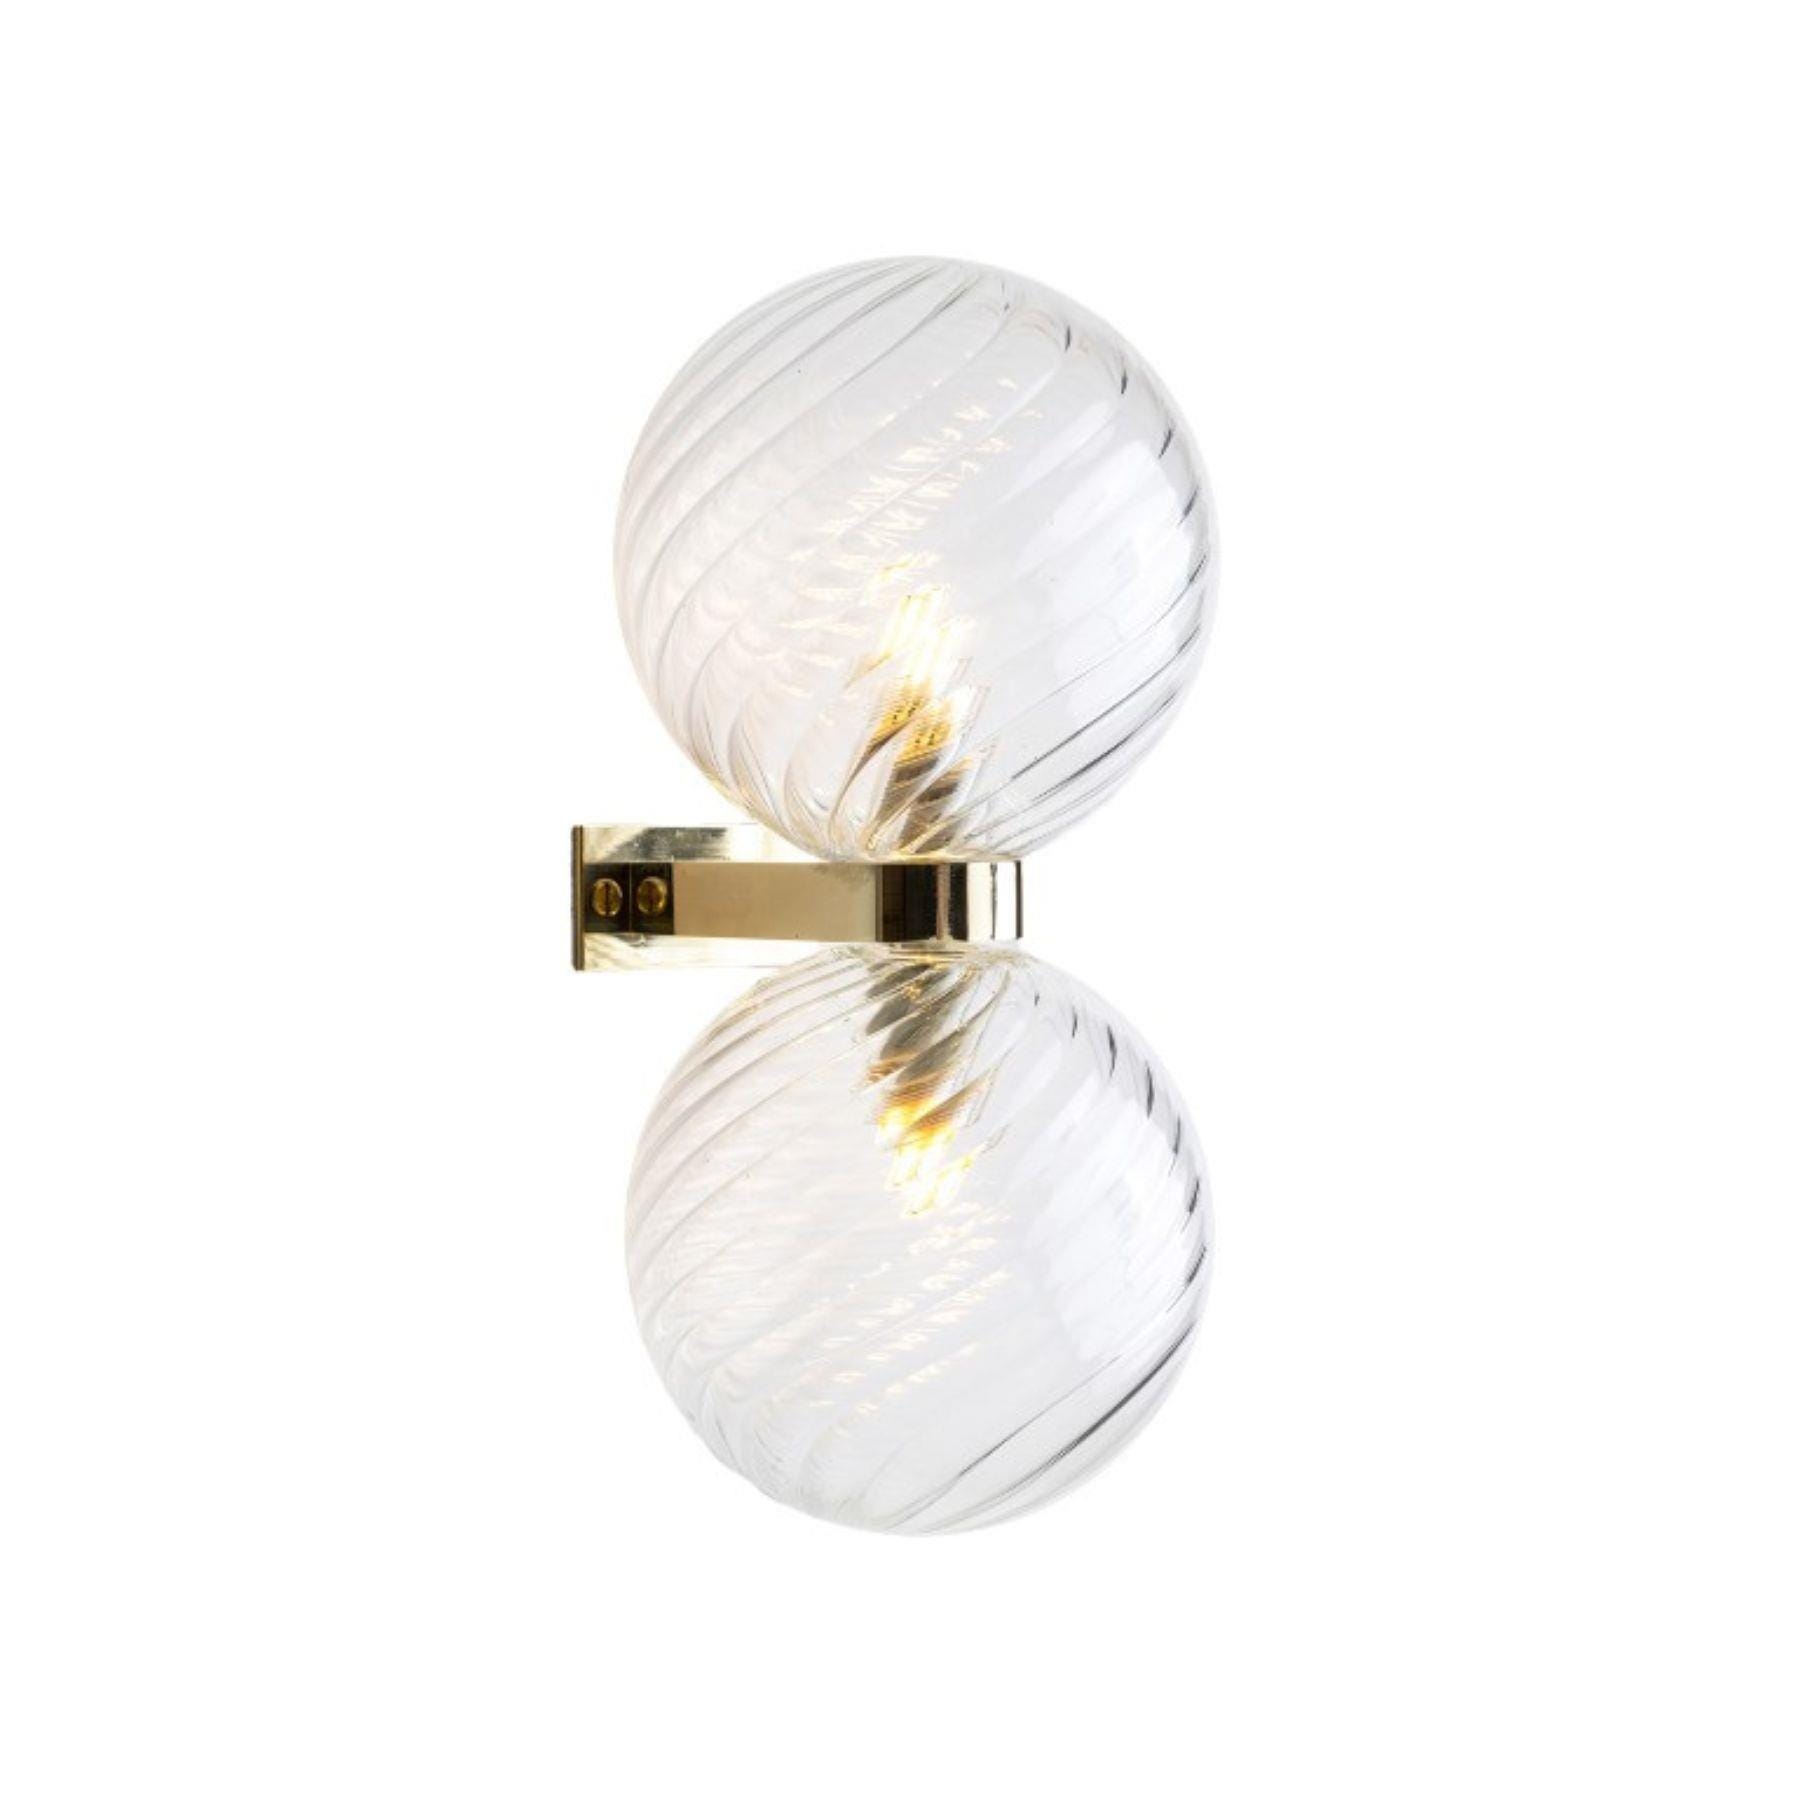 Leverint Pimlico Duo Deco Wall Light Opaque White Wall Lighting